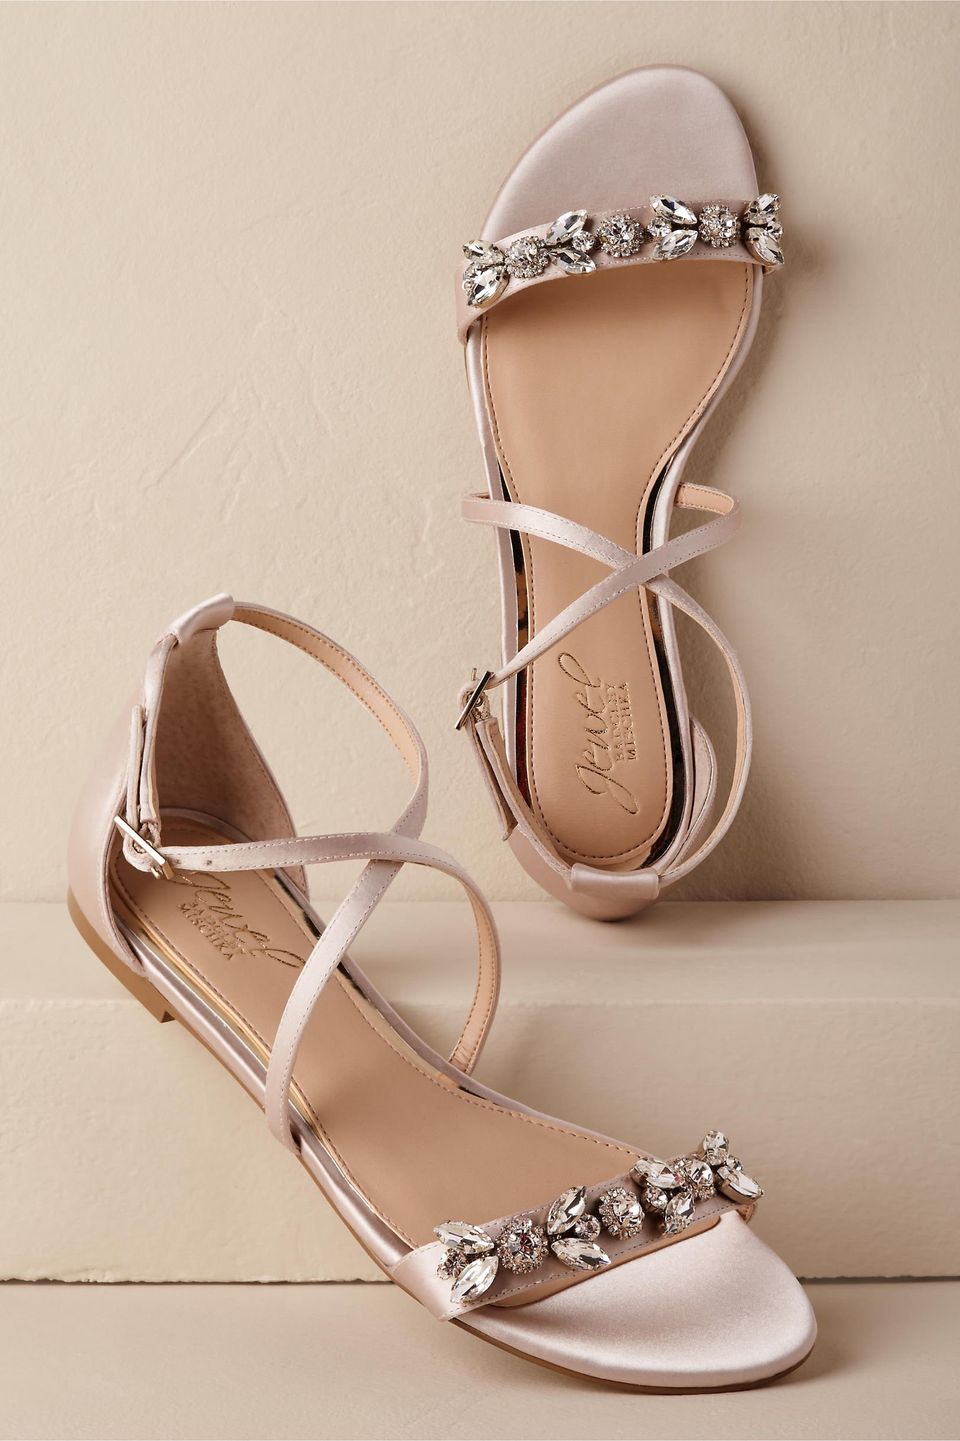 11 Stunning Pairs Of Wedding Shoes That Aren't Heels | HuffPost Life